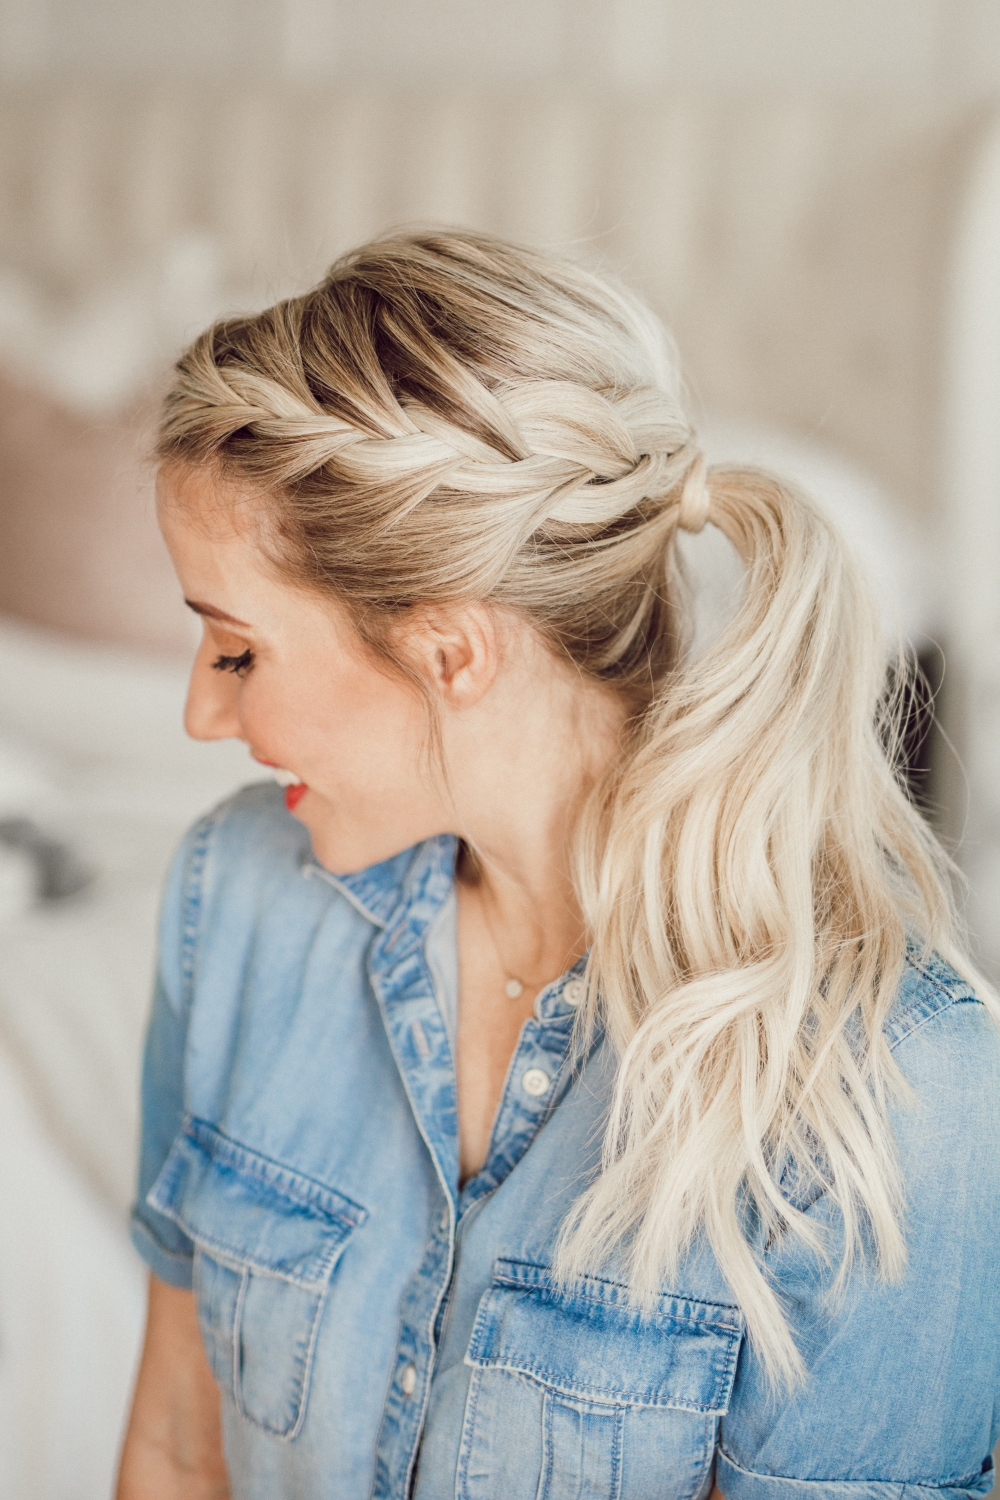 Curly hairstyle tutorial: The Curly Ponytail - Hair Romance